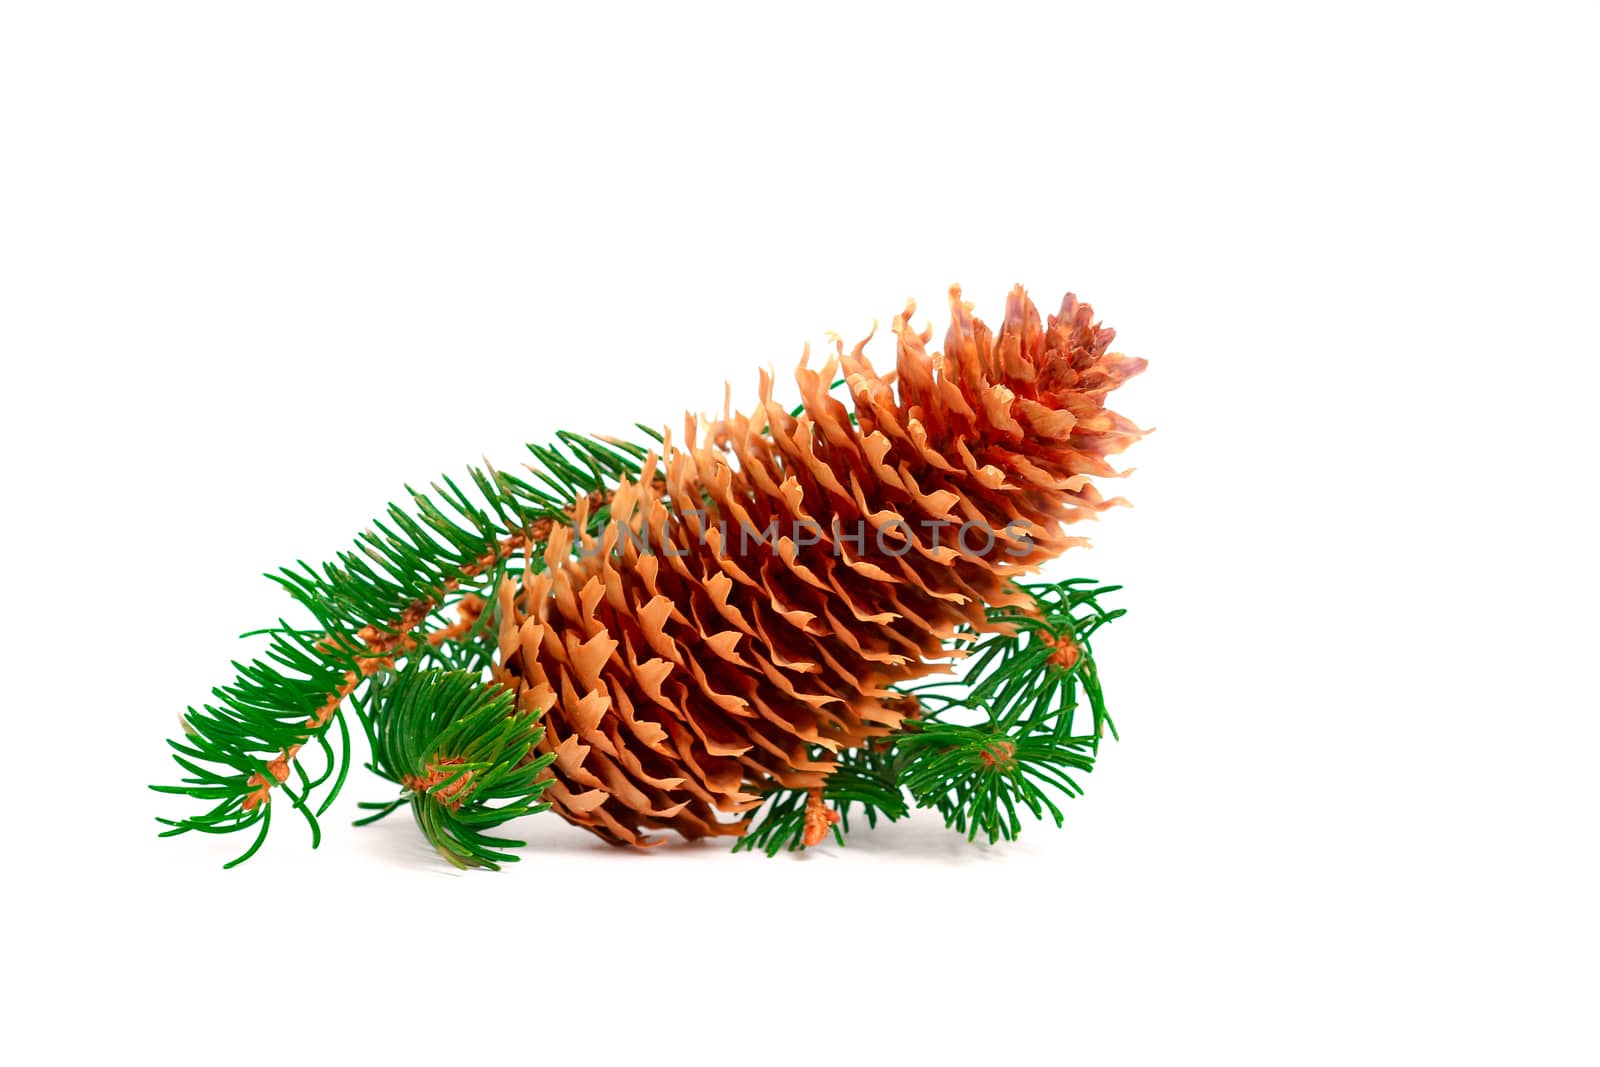 Side view of a pine cone decoration with some green branches next to it